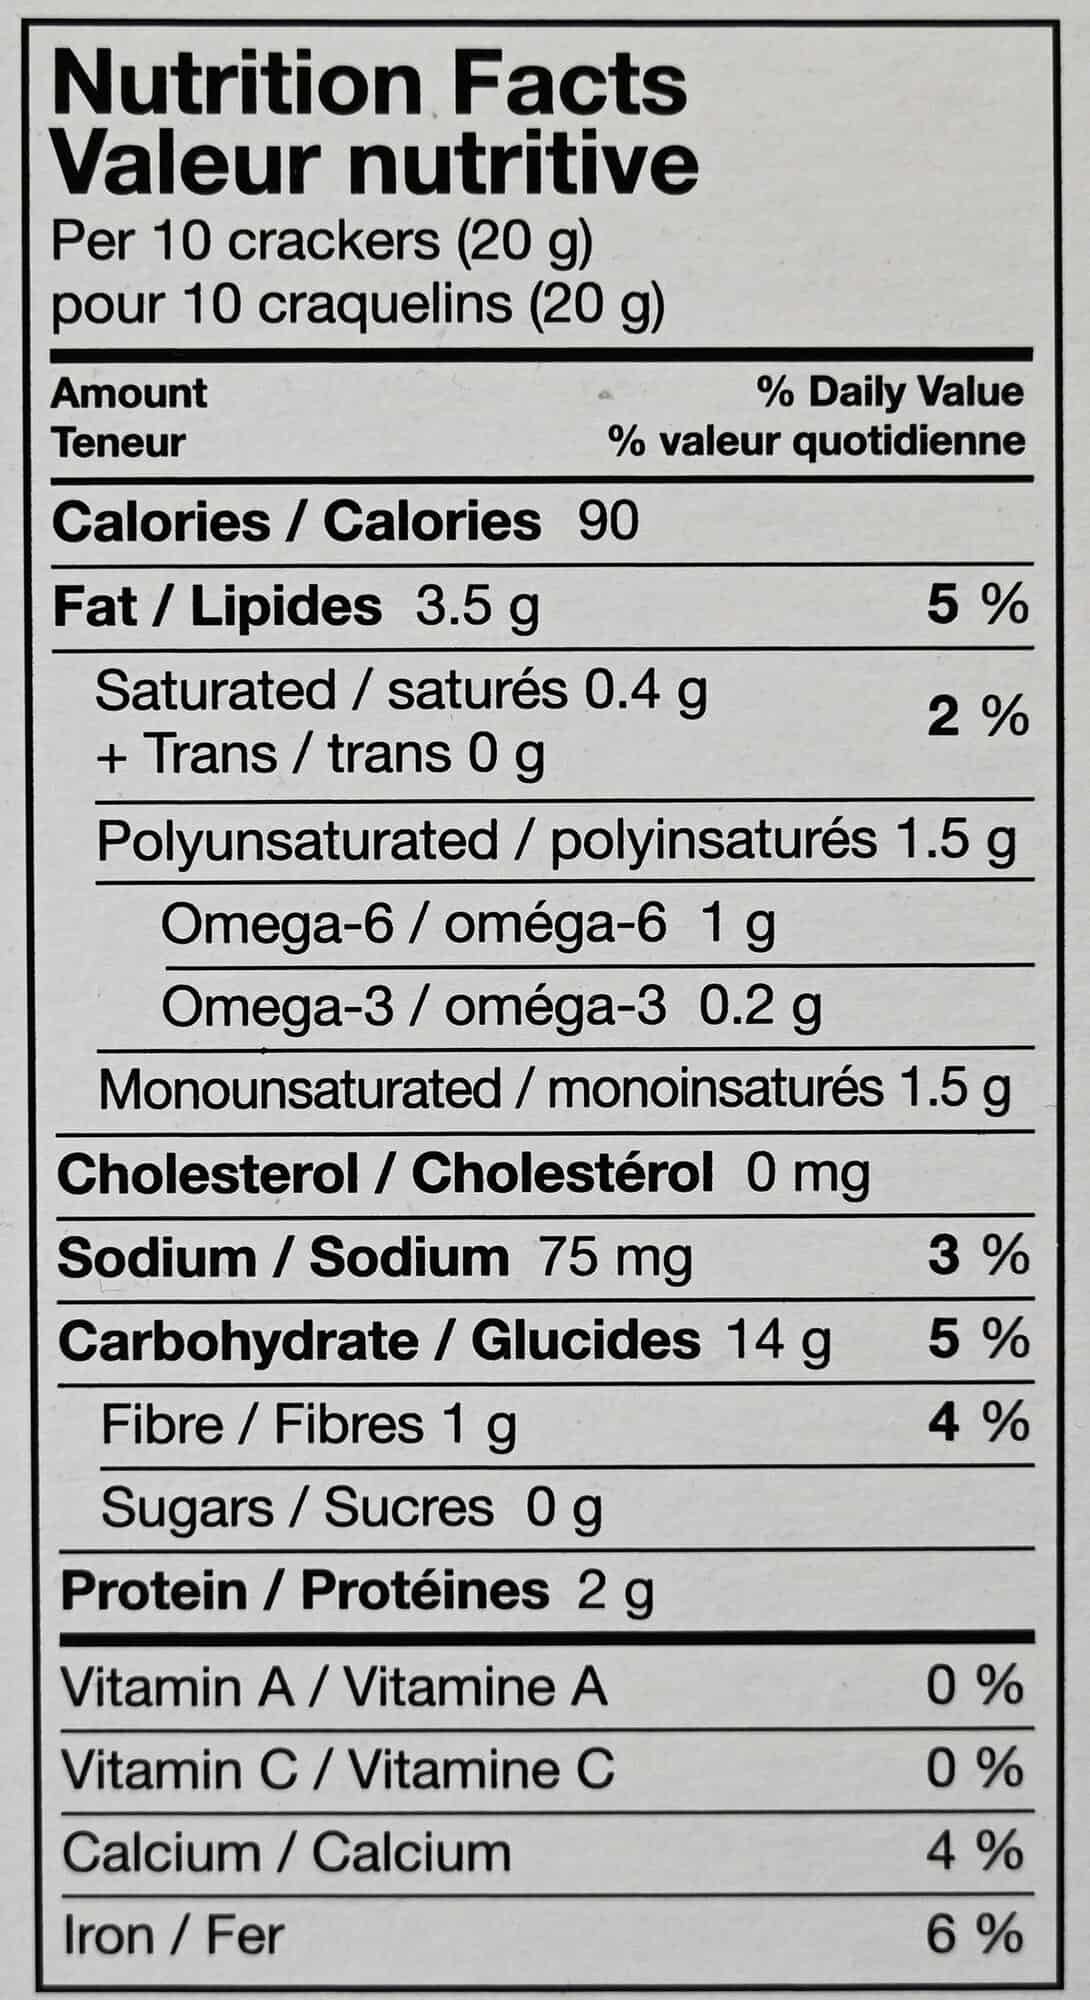 Nutrition facts label for the crackers from the box.